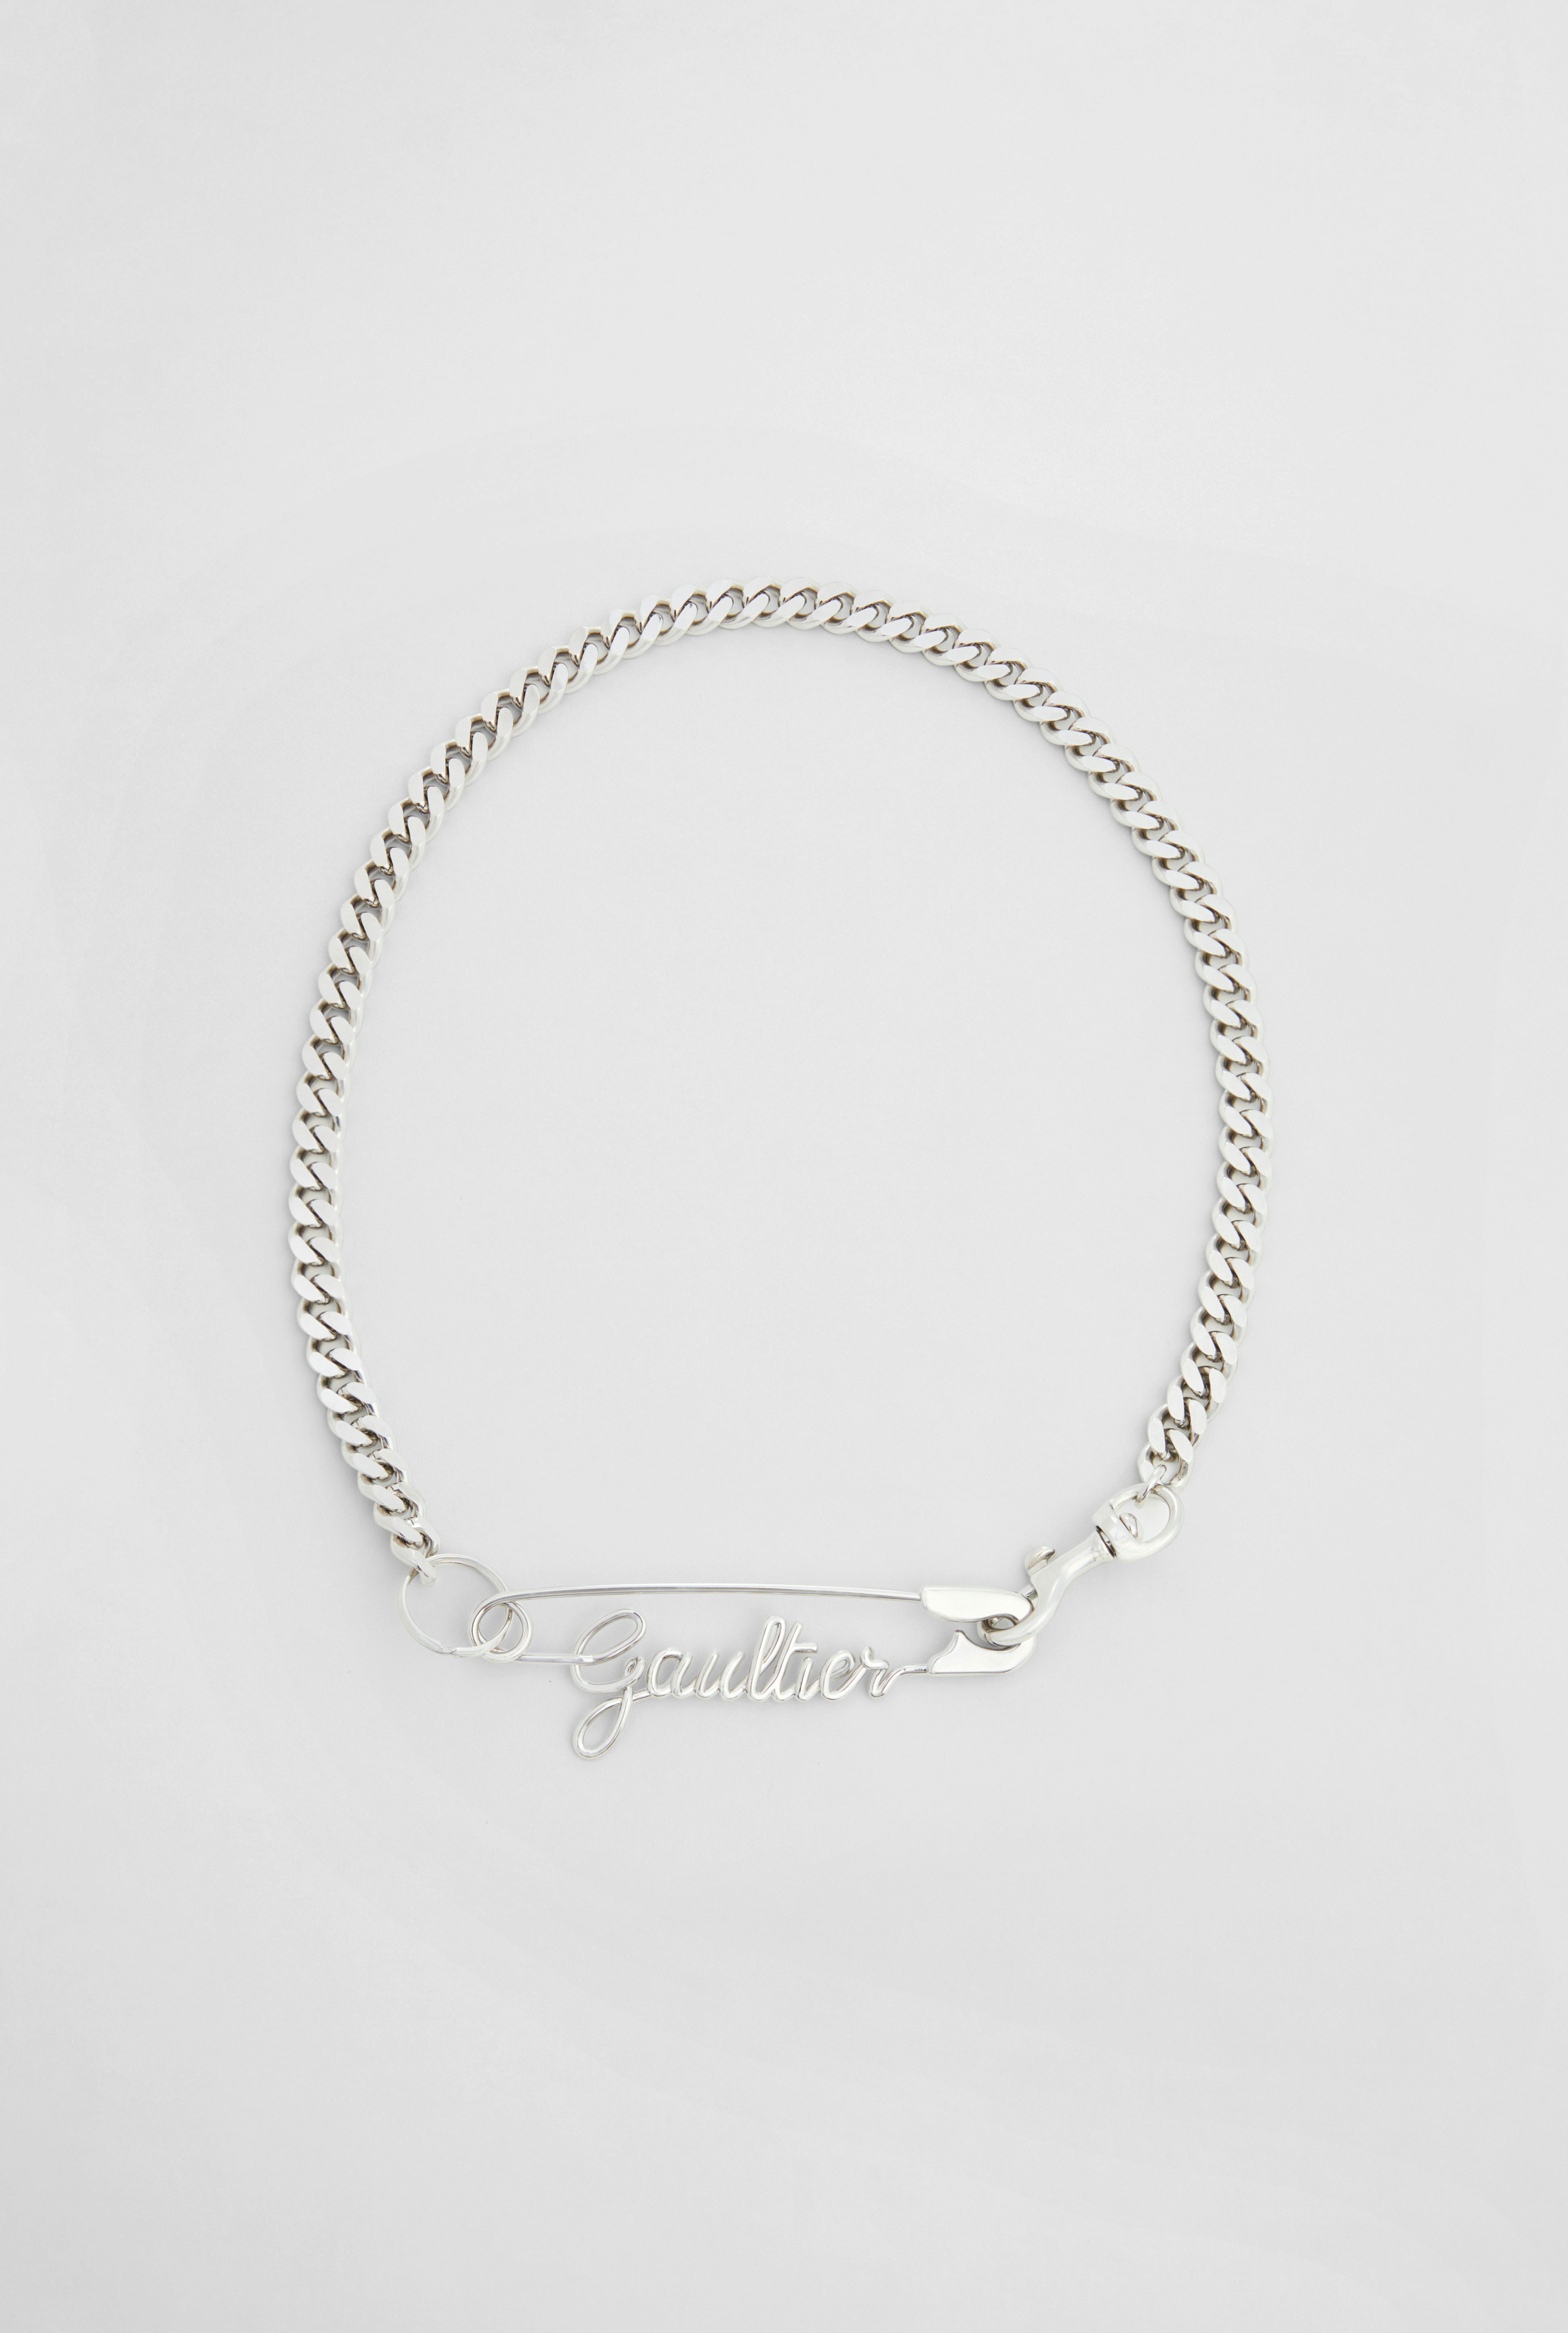 The Gaultier Safety Pin necklace  hover